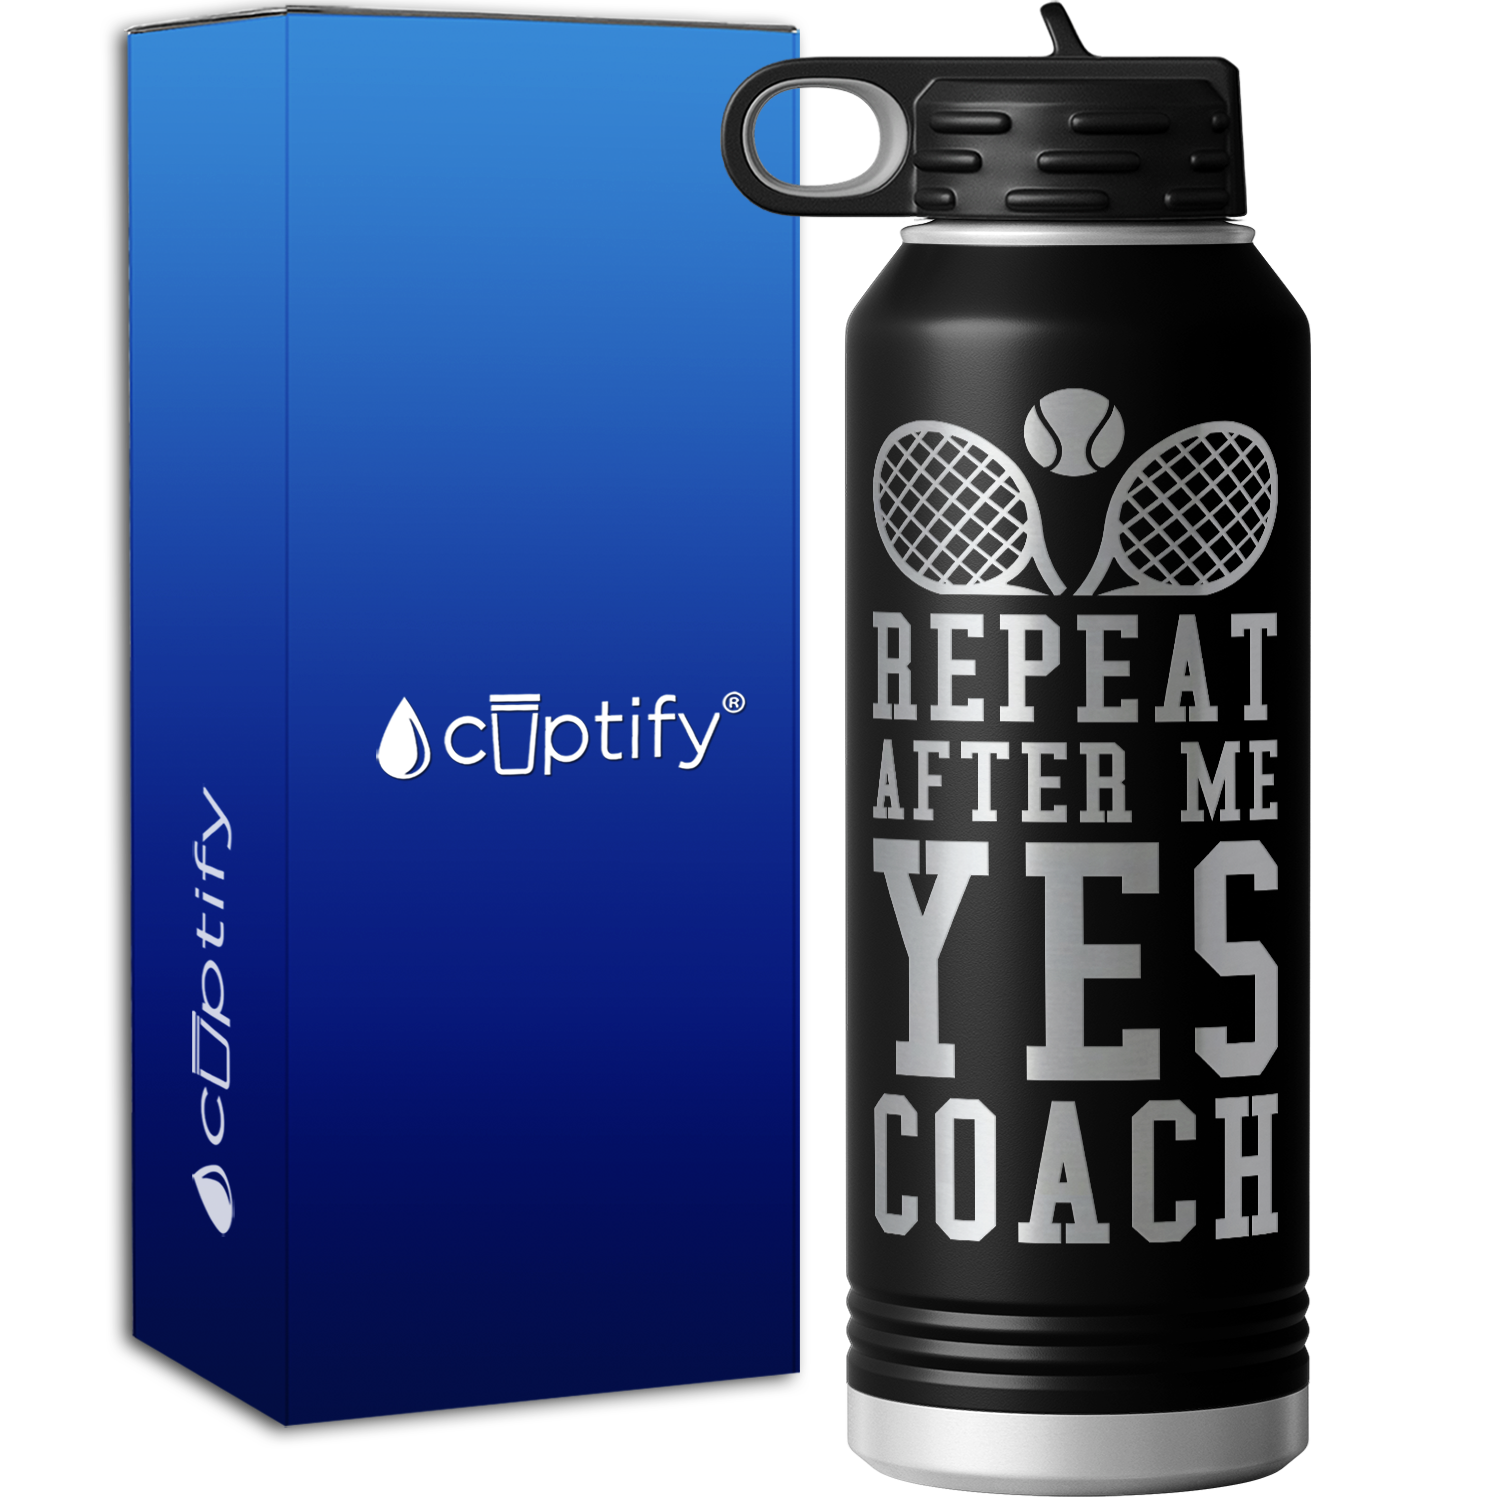 Repeat After Me Yes Coach 40oz Sport Water Bottle